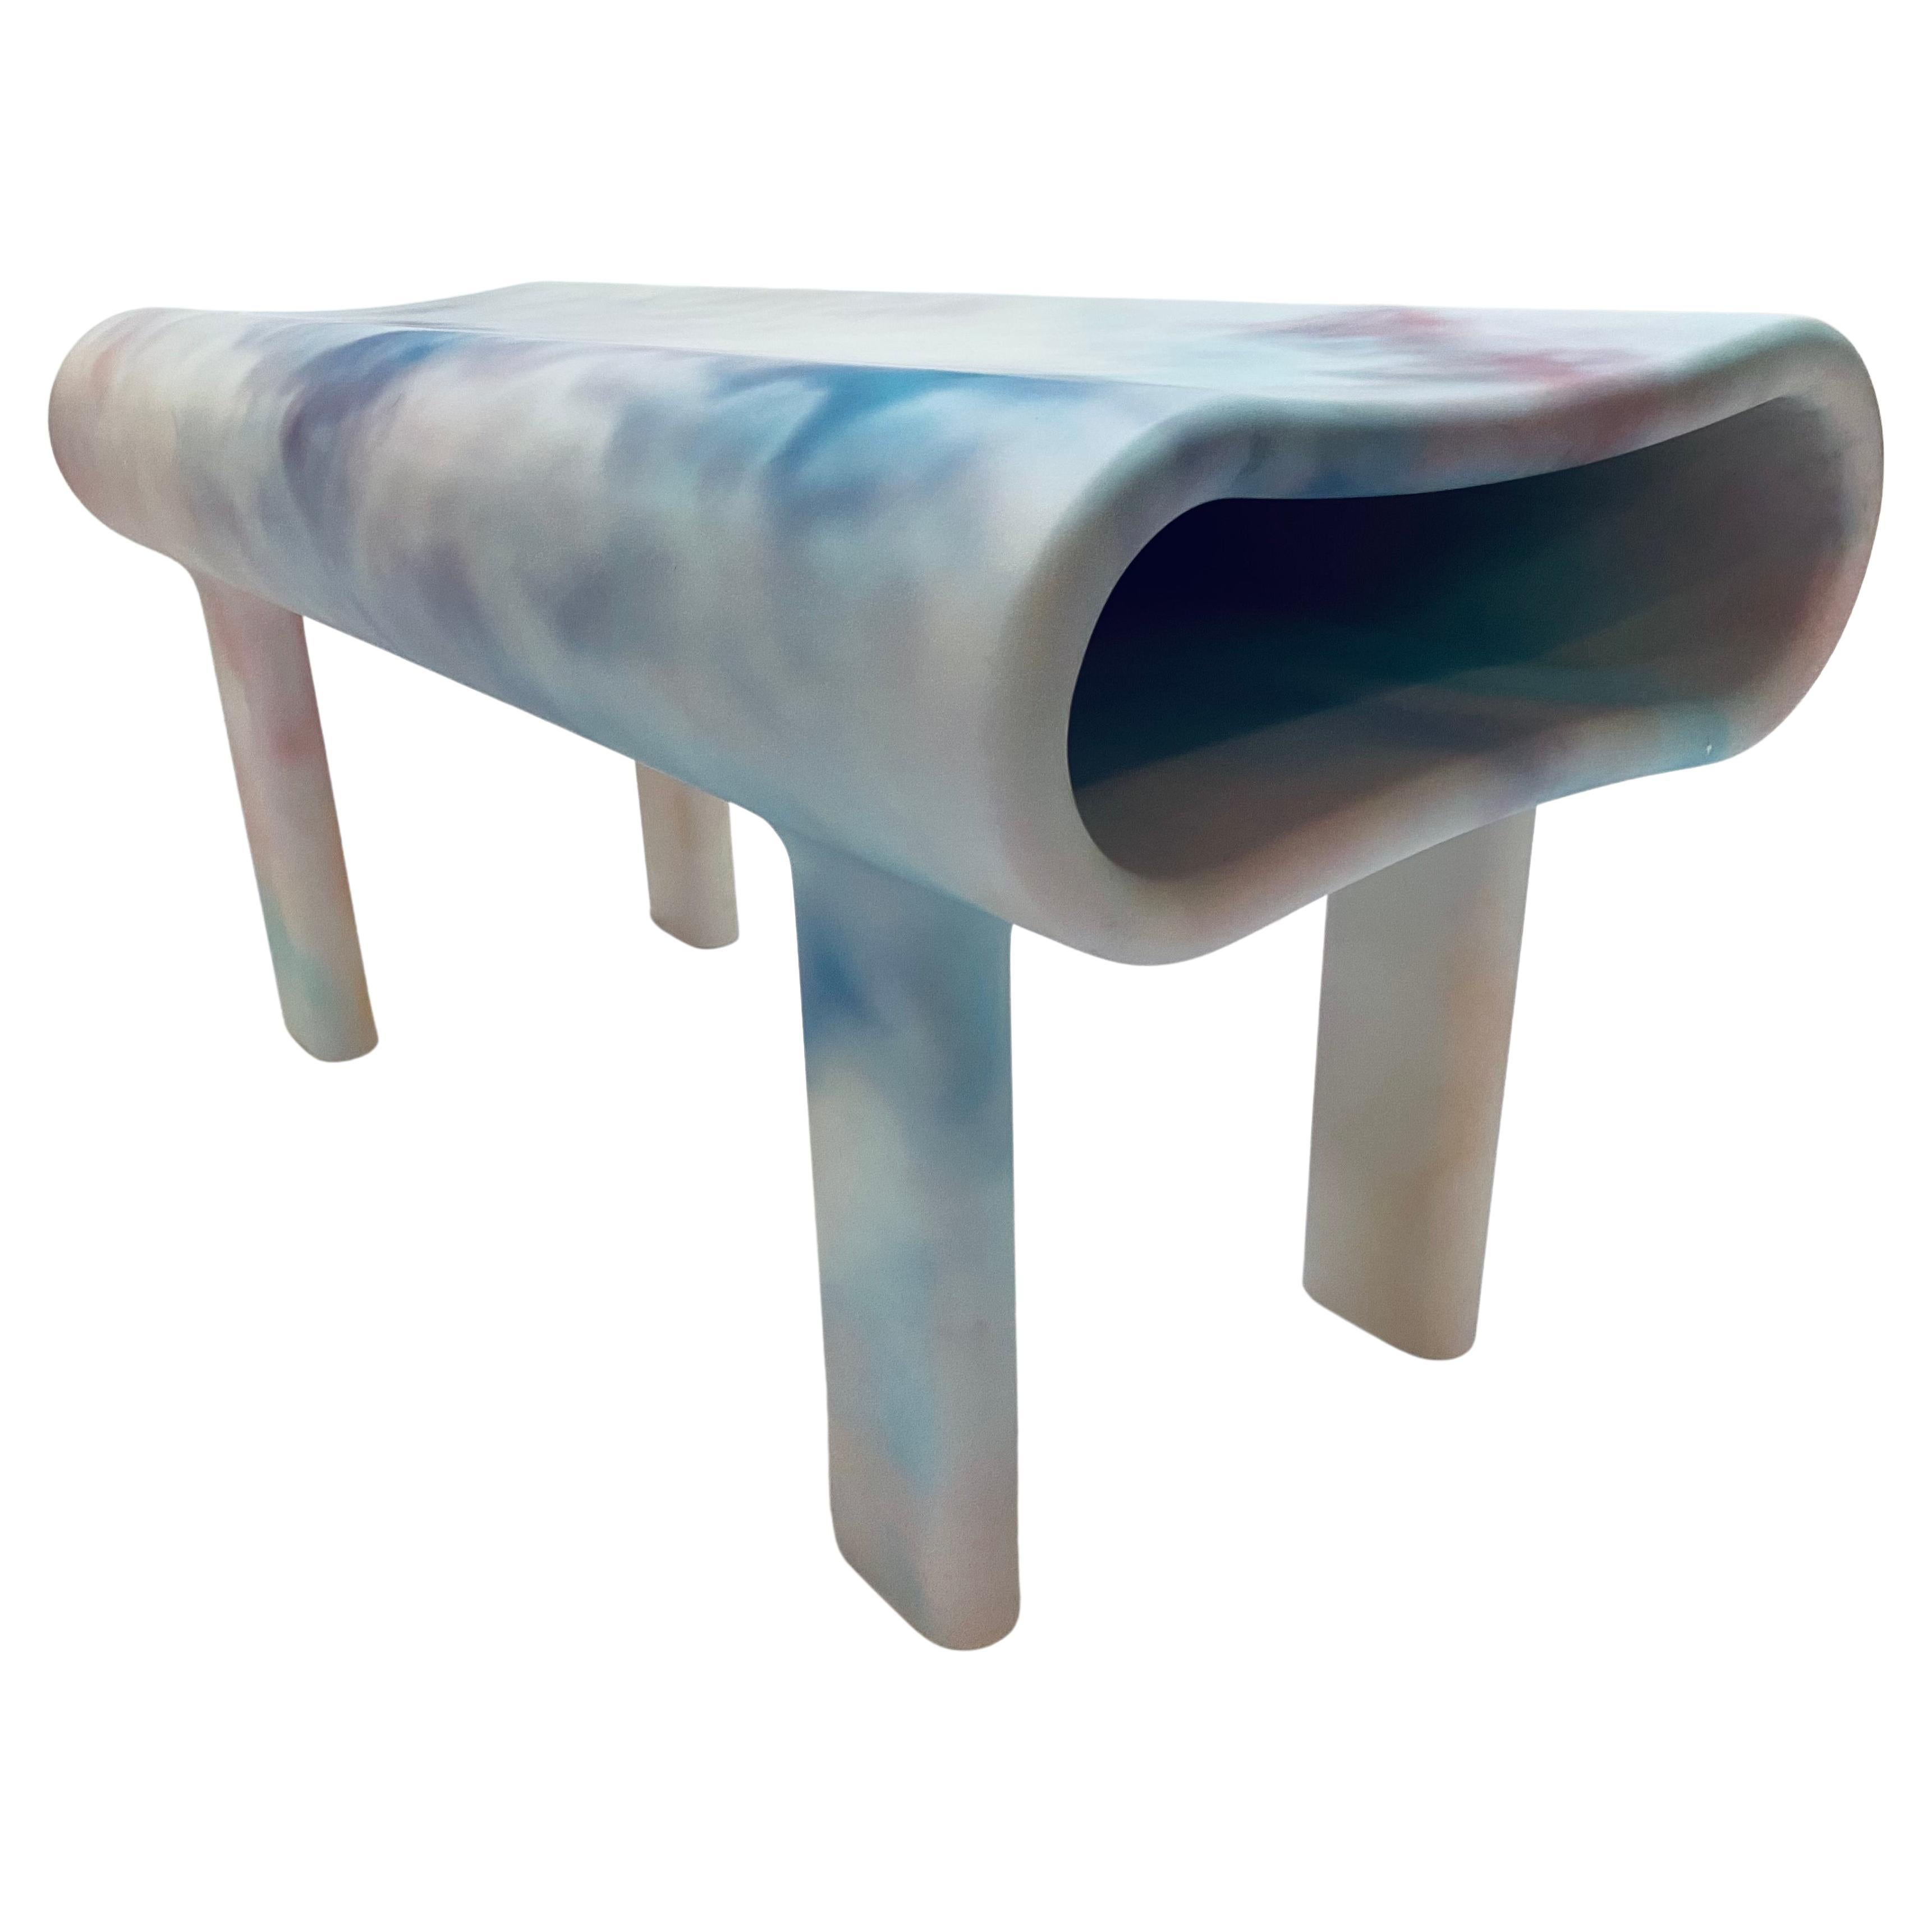 Contemporty Sculpted Fine Art Minimalist Wooden Bench with Acrylic Finish For Sale